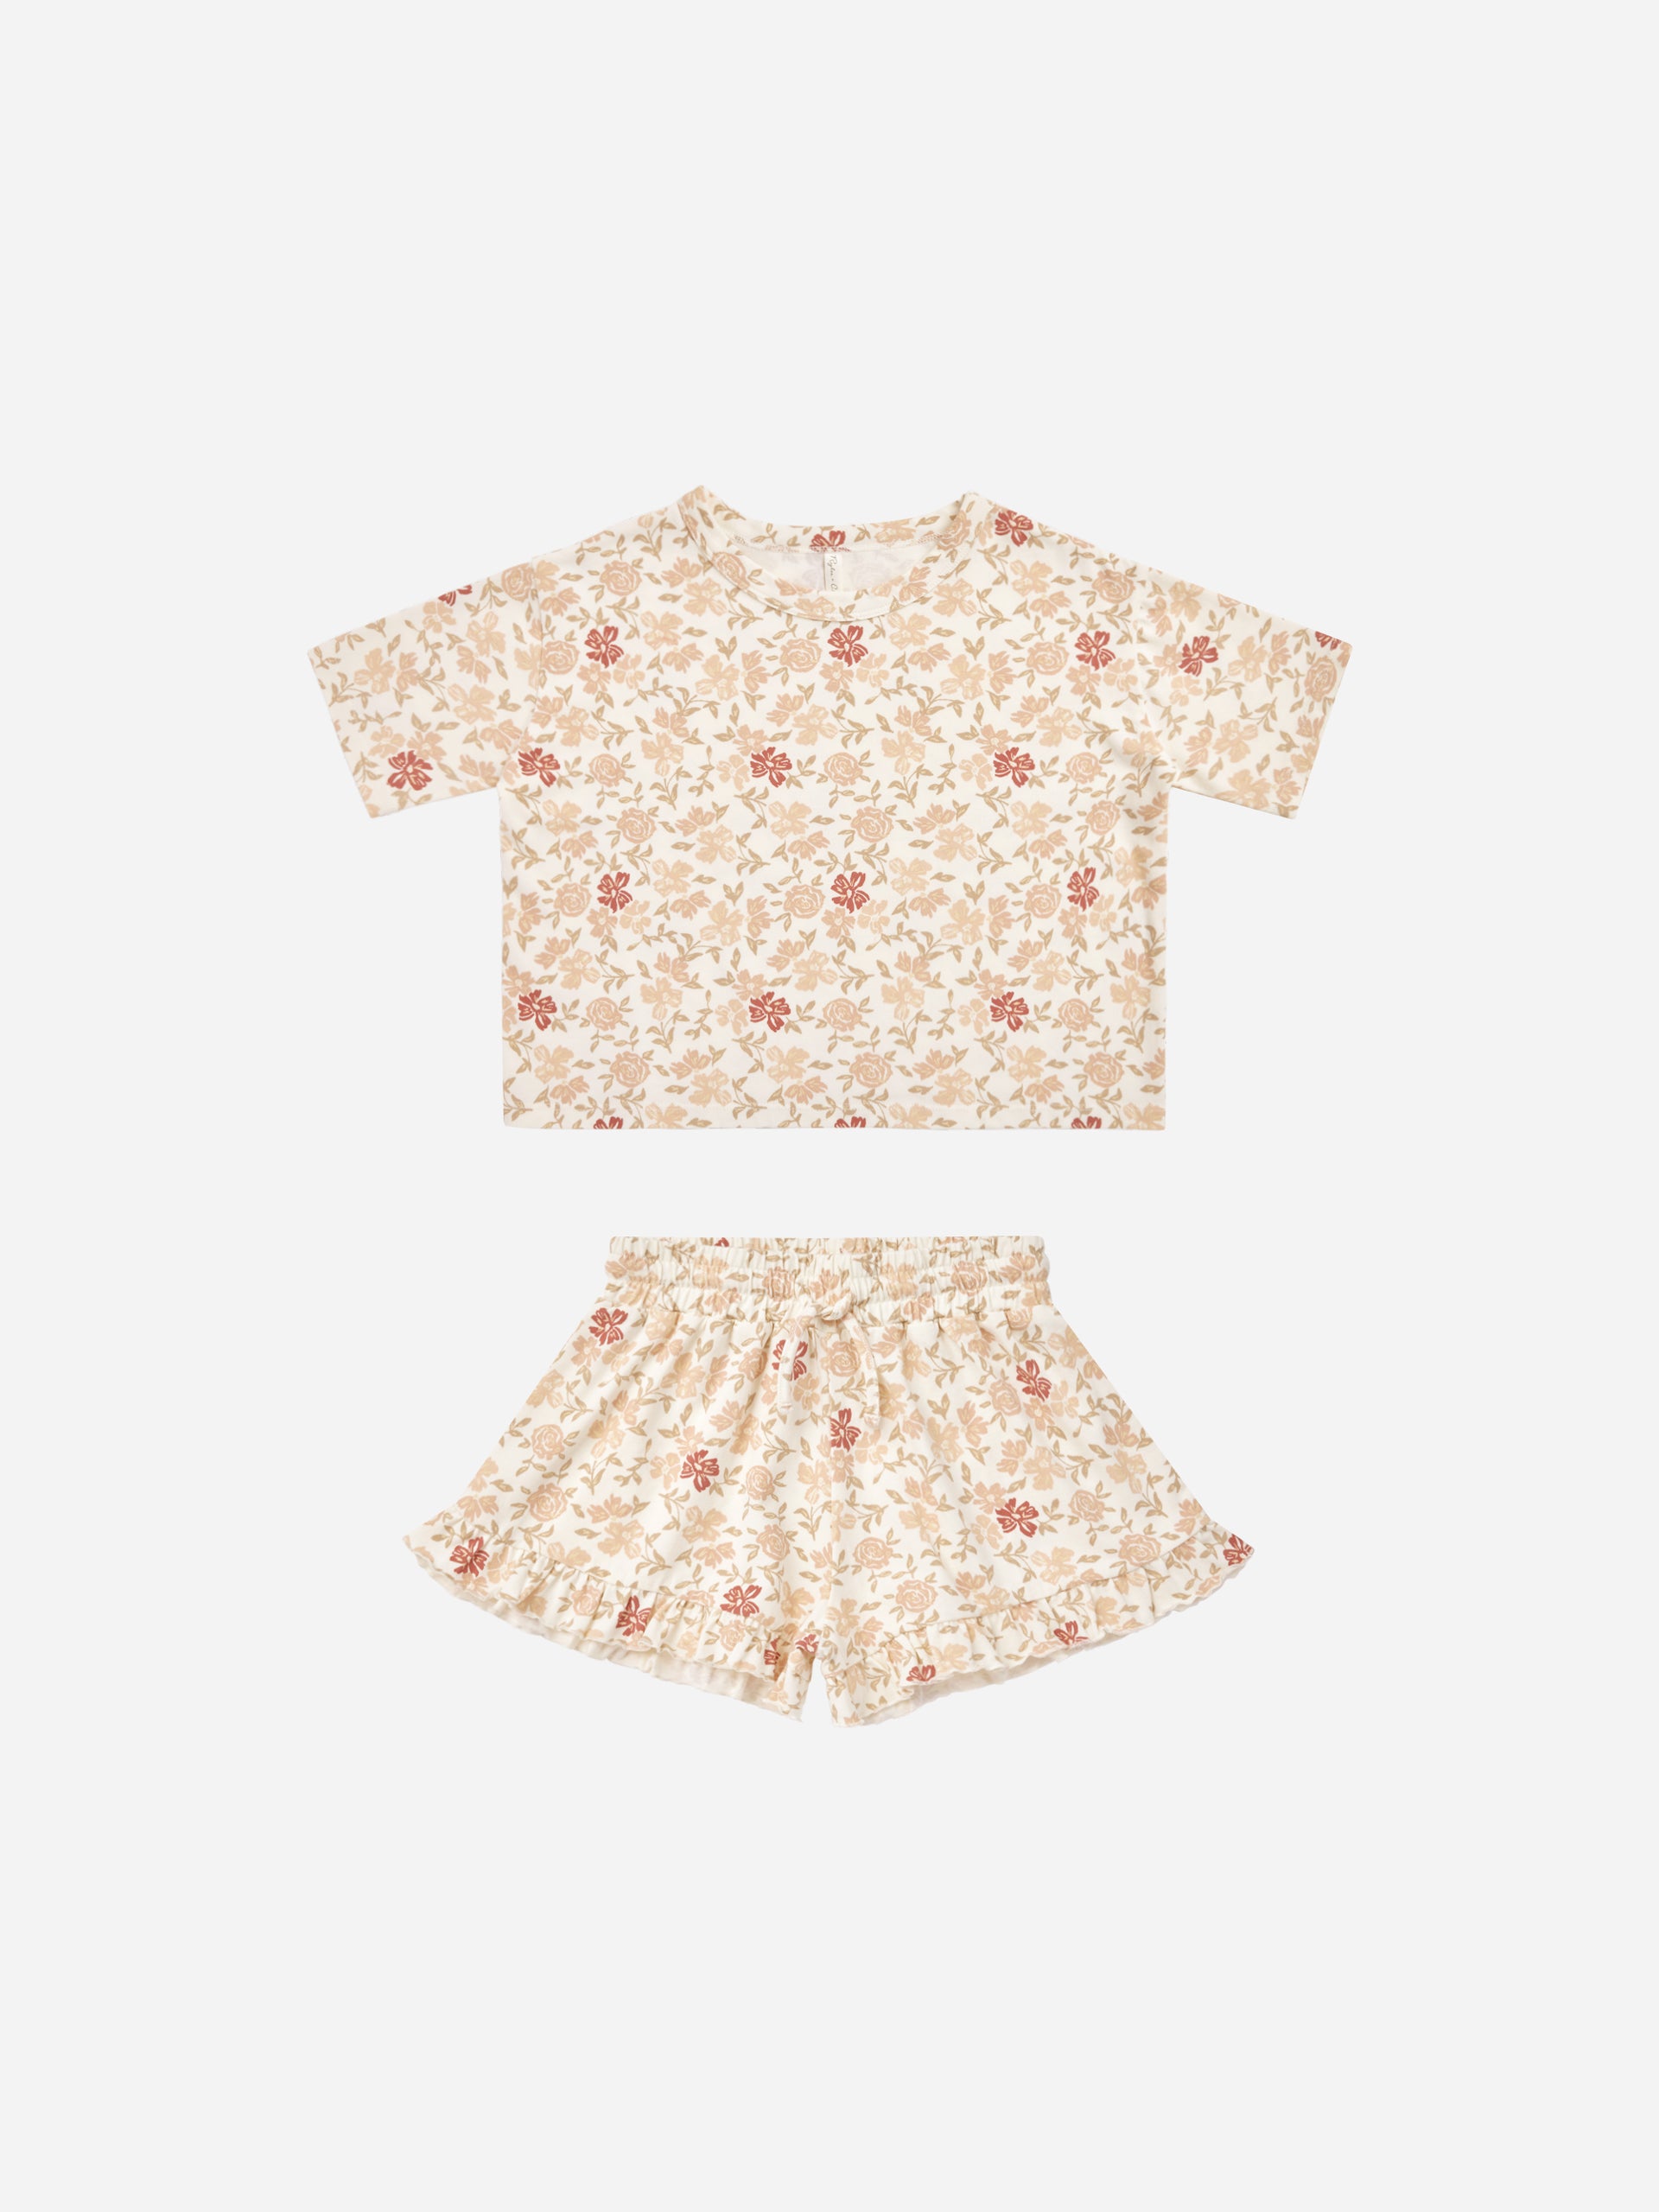 Mosie Set || Pink Floral - Rylee + Cru | Kids Clothes | Trendy Baby Clothes | Modern Infant Outfits |